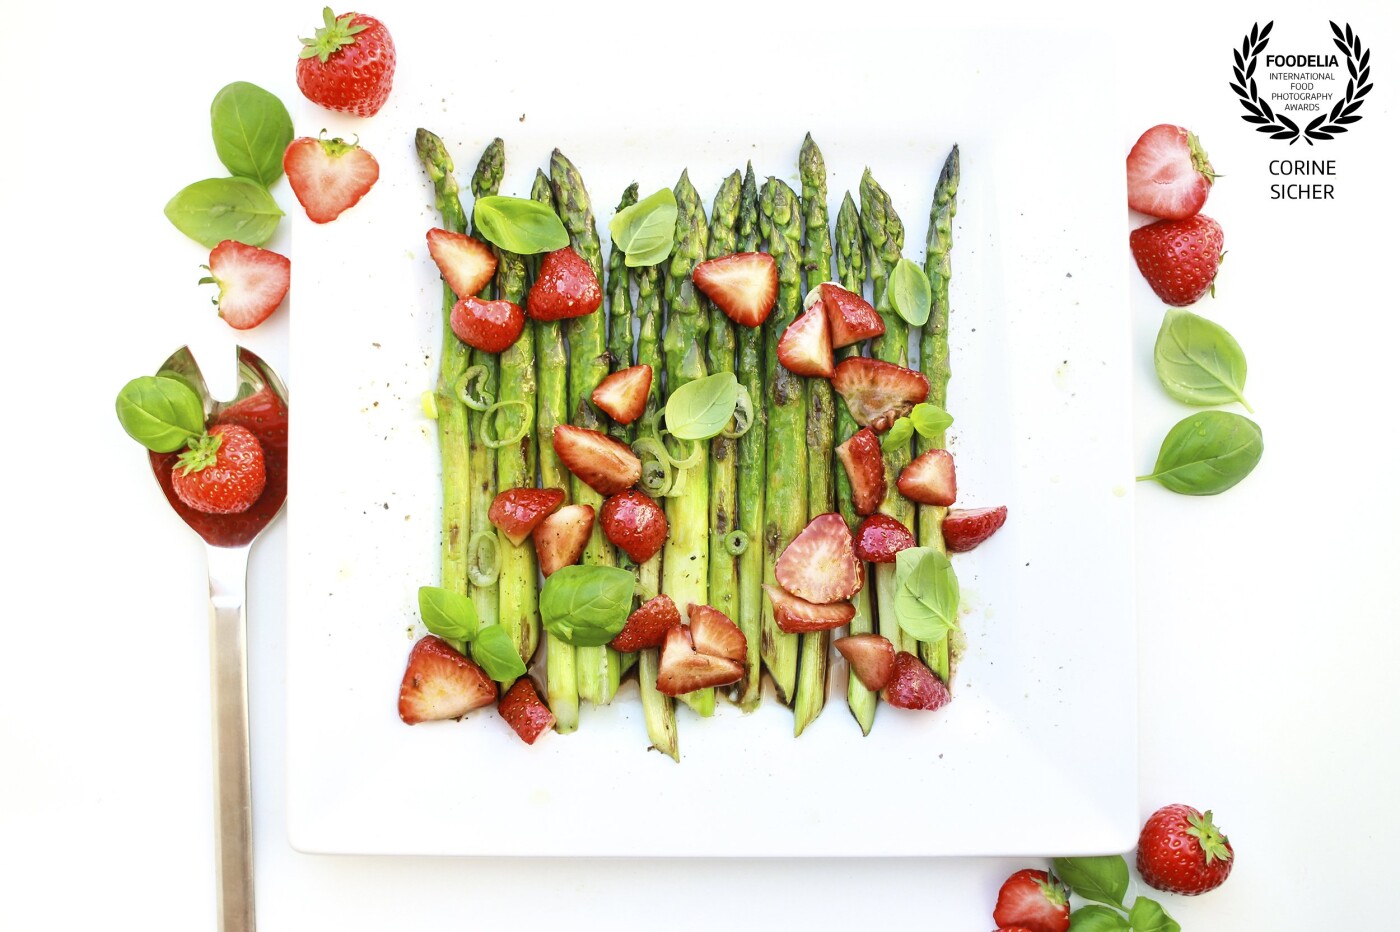 Spring is here. I made a quick salad with asparagus and strawberries, the perfect combination in color and on the plate. <br />
Shooting with natural light and some reflecting sheets of white paper. 